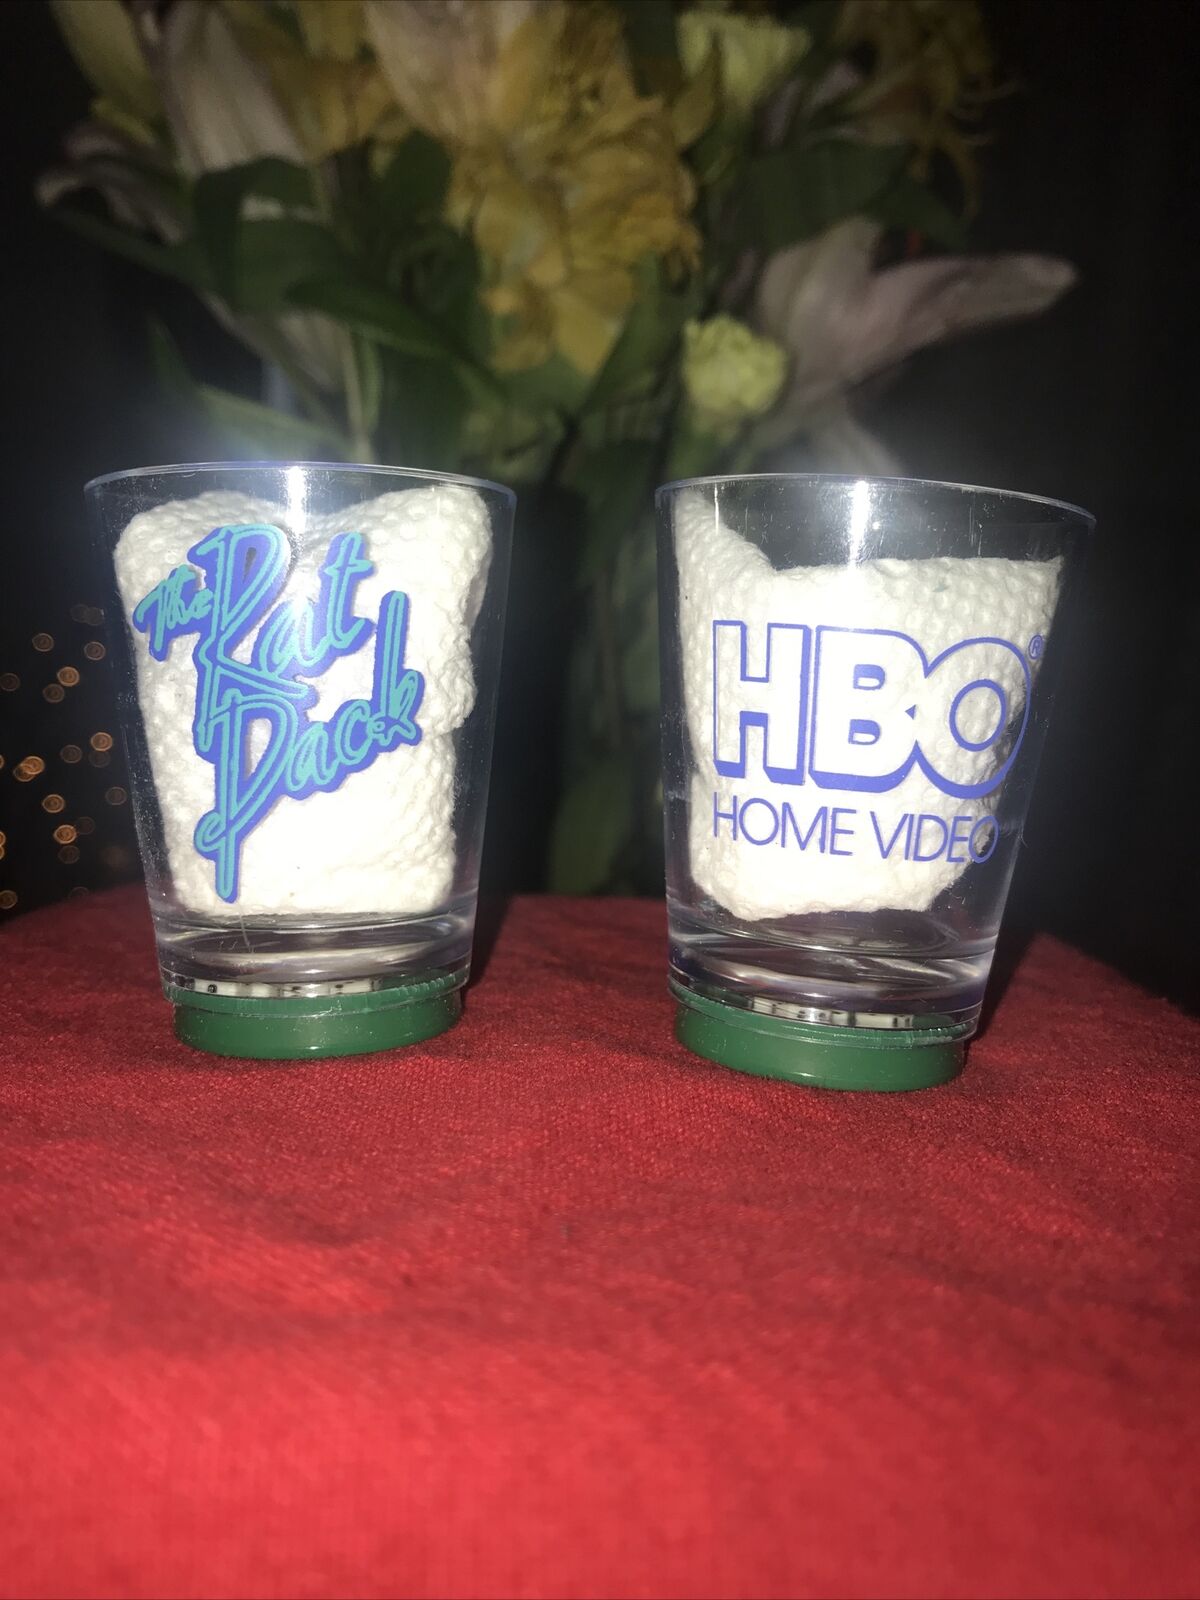 1- THE RAT PACK HBO HOME VIDEO PROMOTIONAL SHOT GLASS w/ TINY CRAPS DICE INSIDE